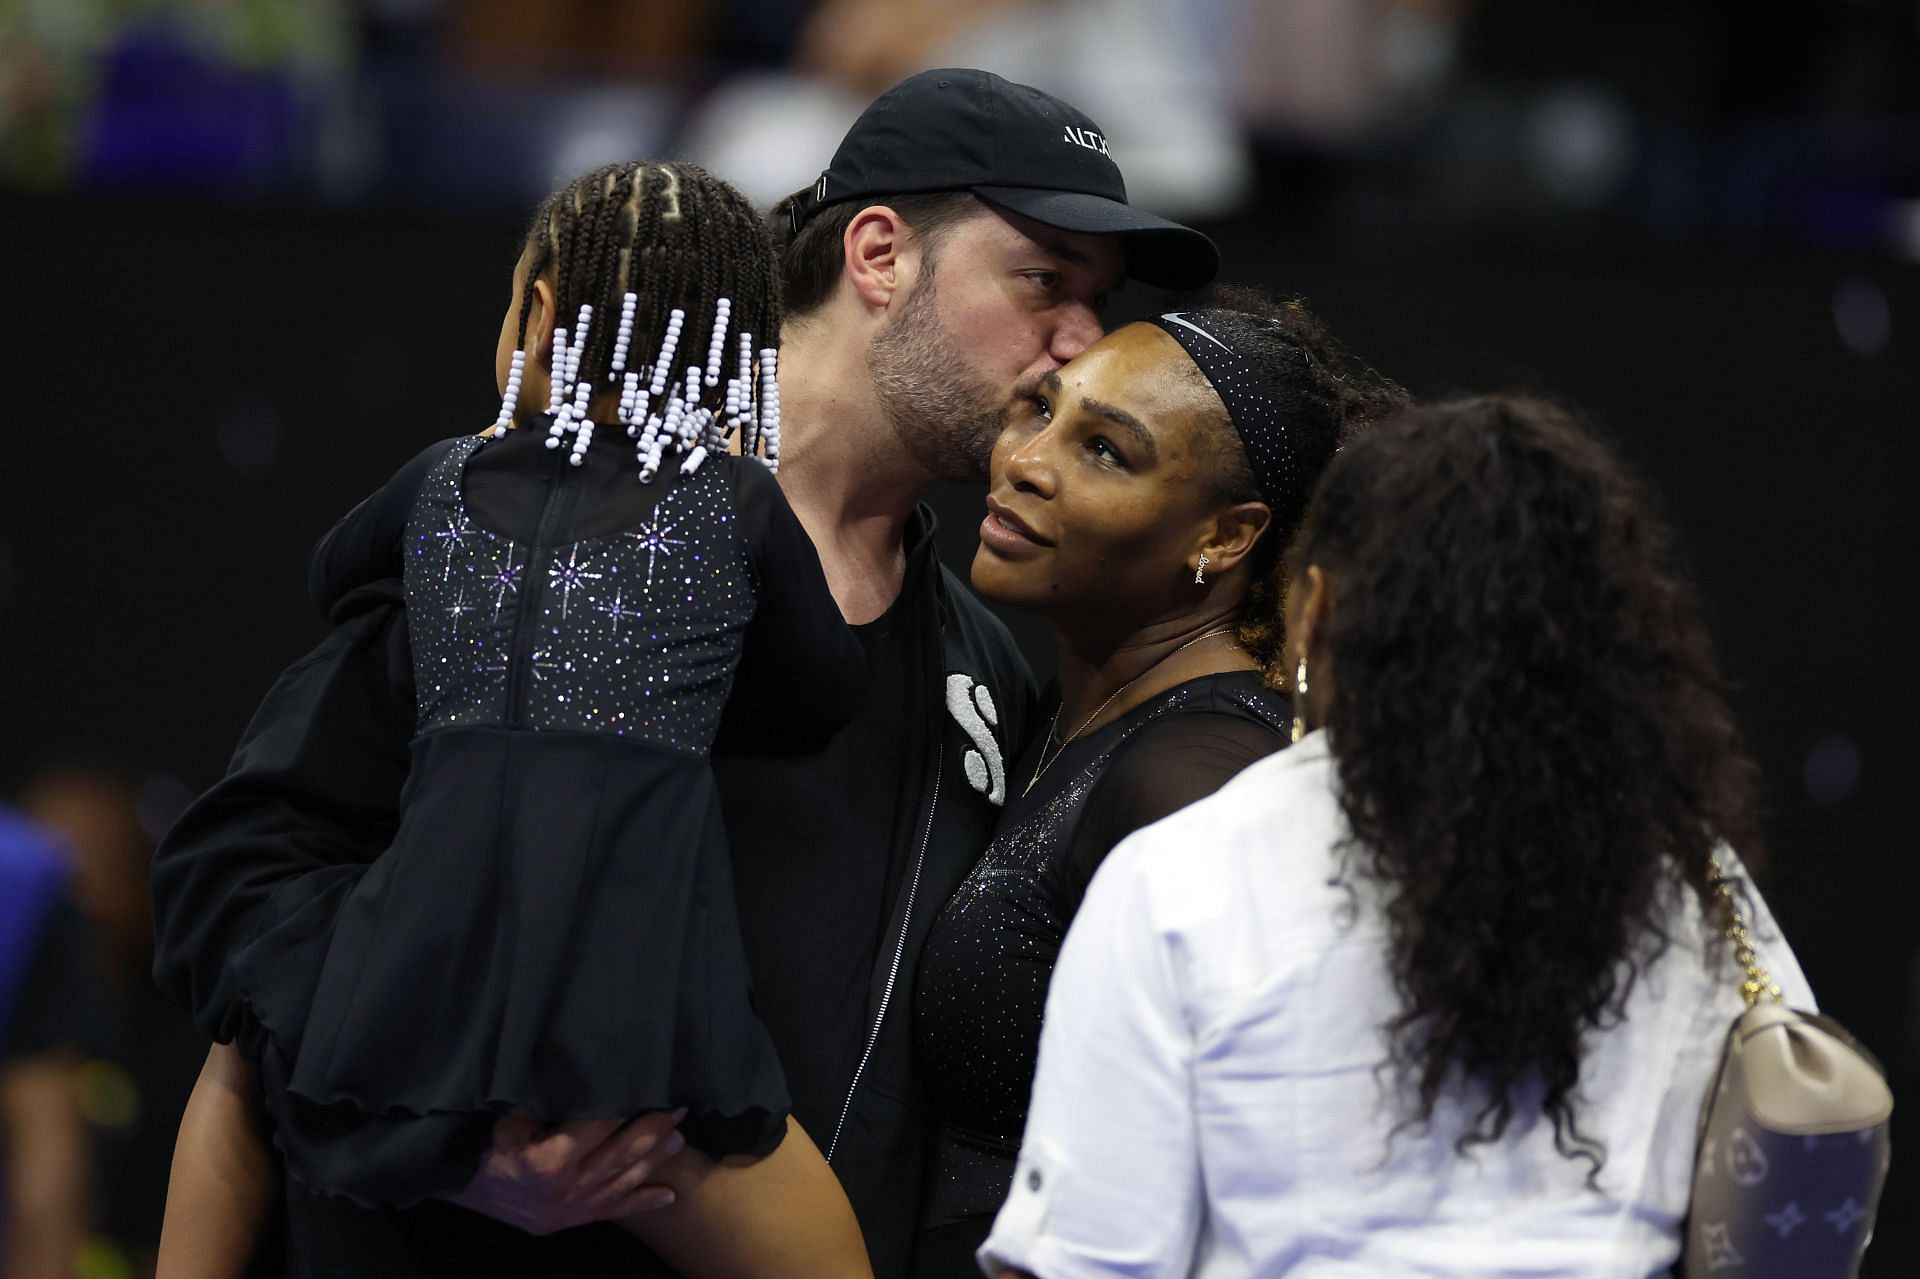 Alexis Ohanian with Serena Wiliams and their daughter Olympia at the 2022 US Open